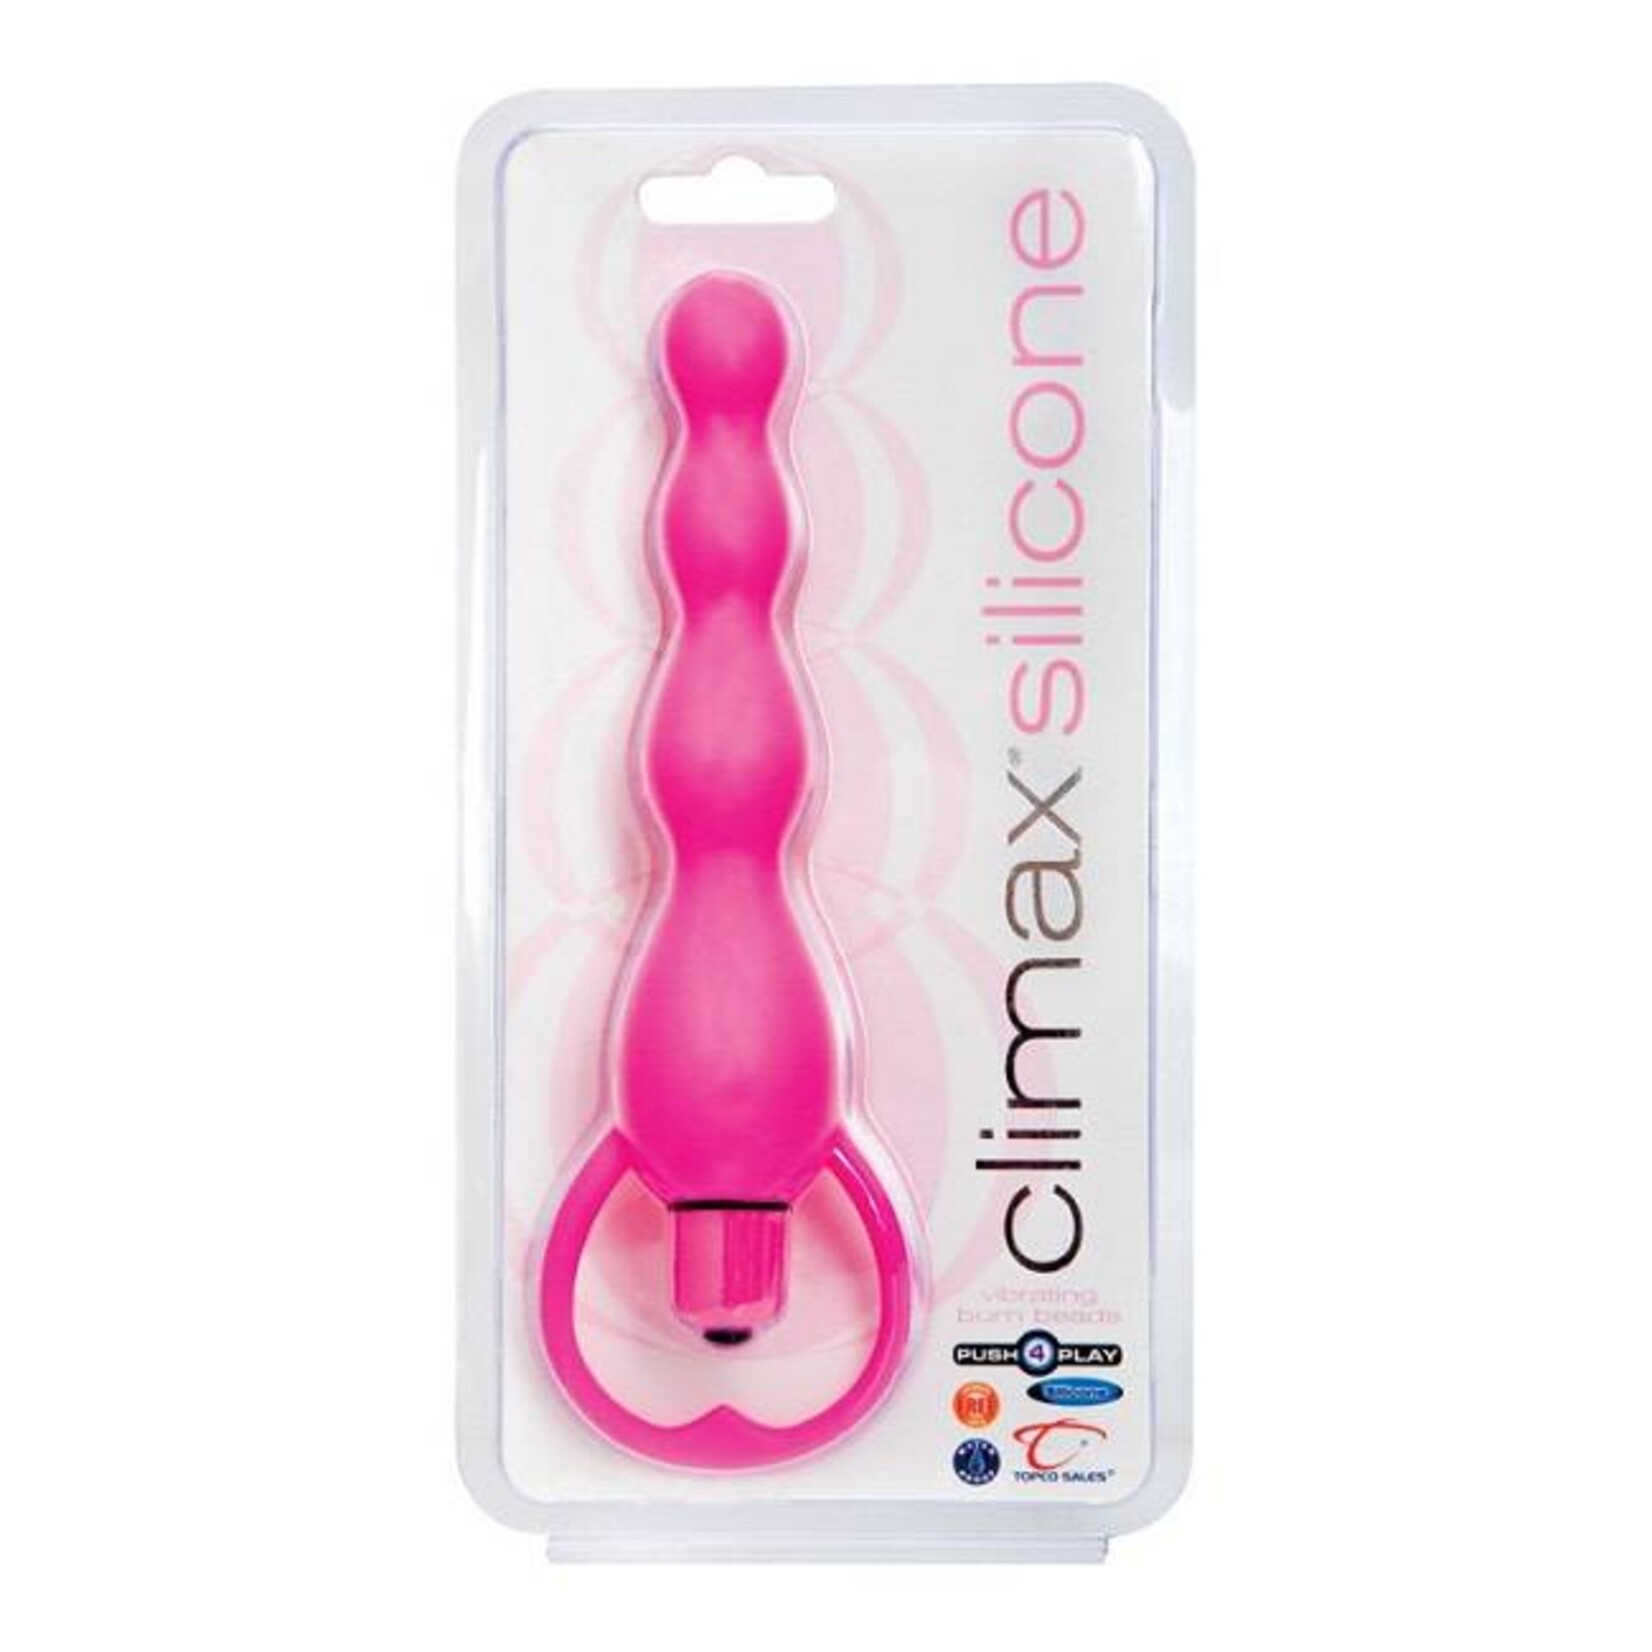 Topco Sales Climax Silicone Vibrating Bum Beads